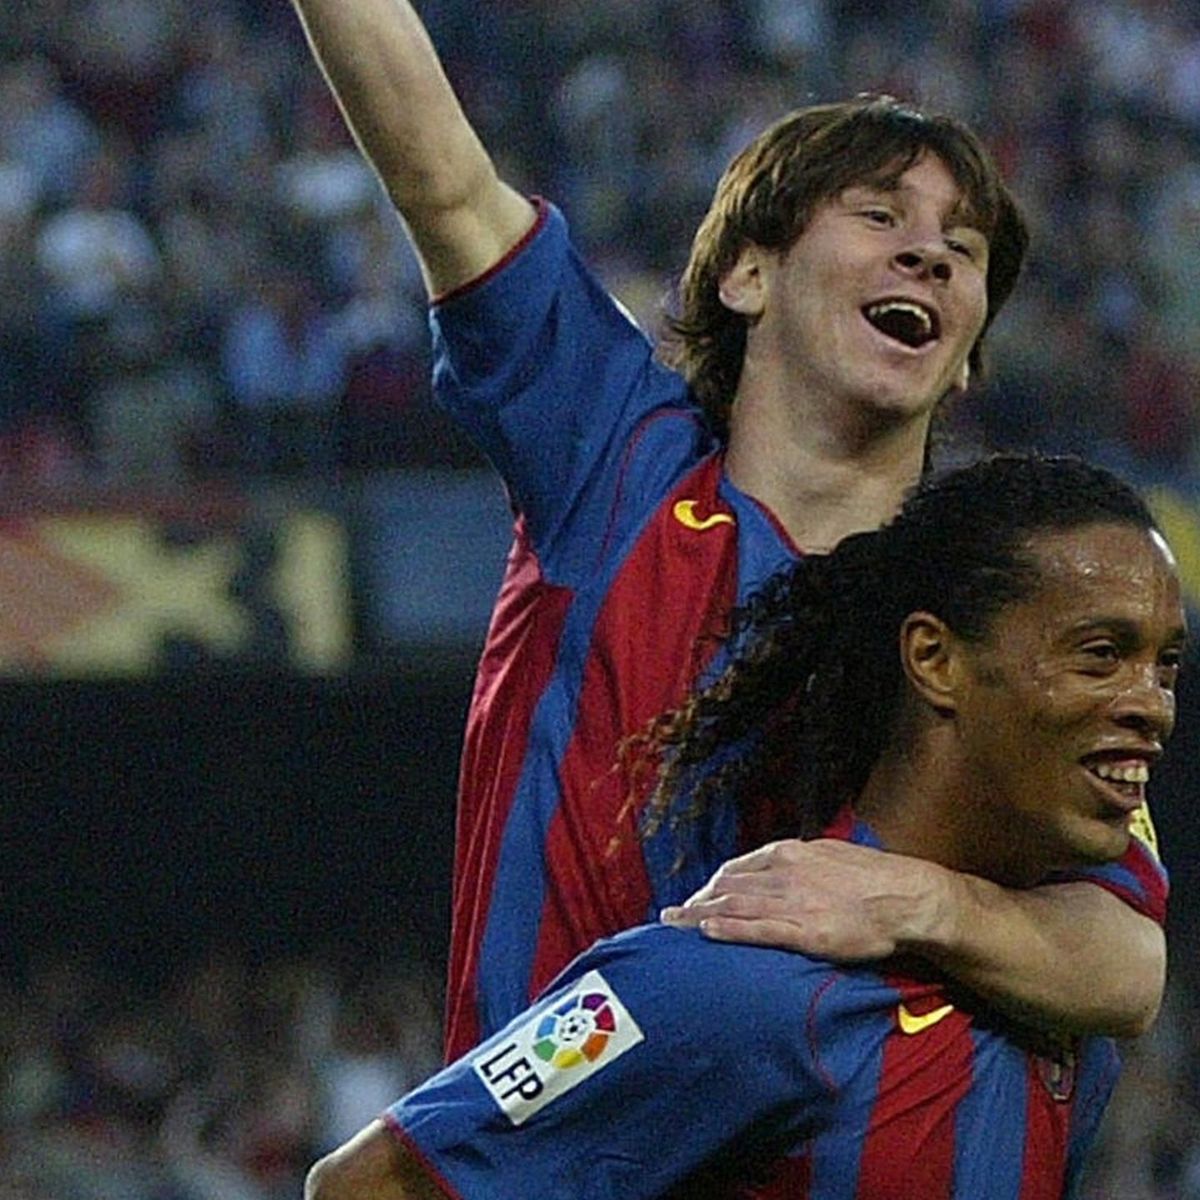 Football news - Lionel Messi praises 'mentor' Ronaldinho and names the best  striker he's watched - Eurosport